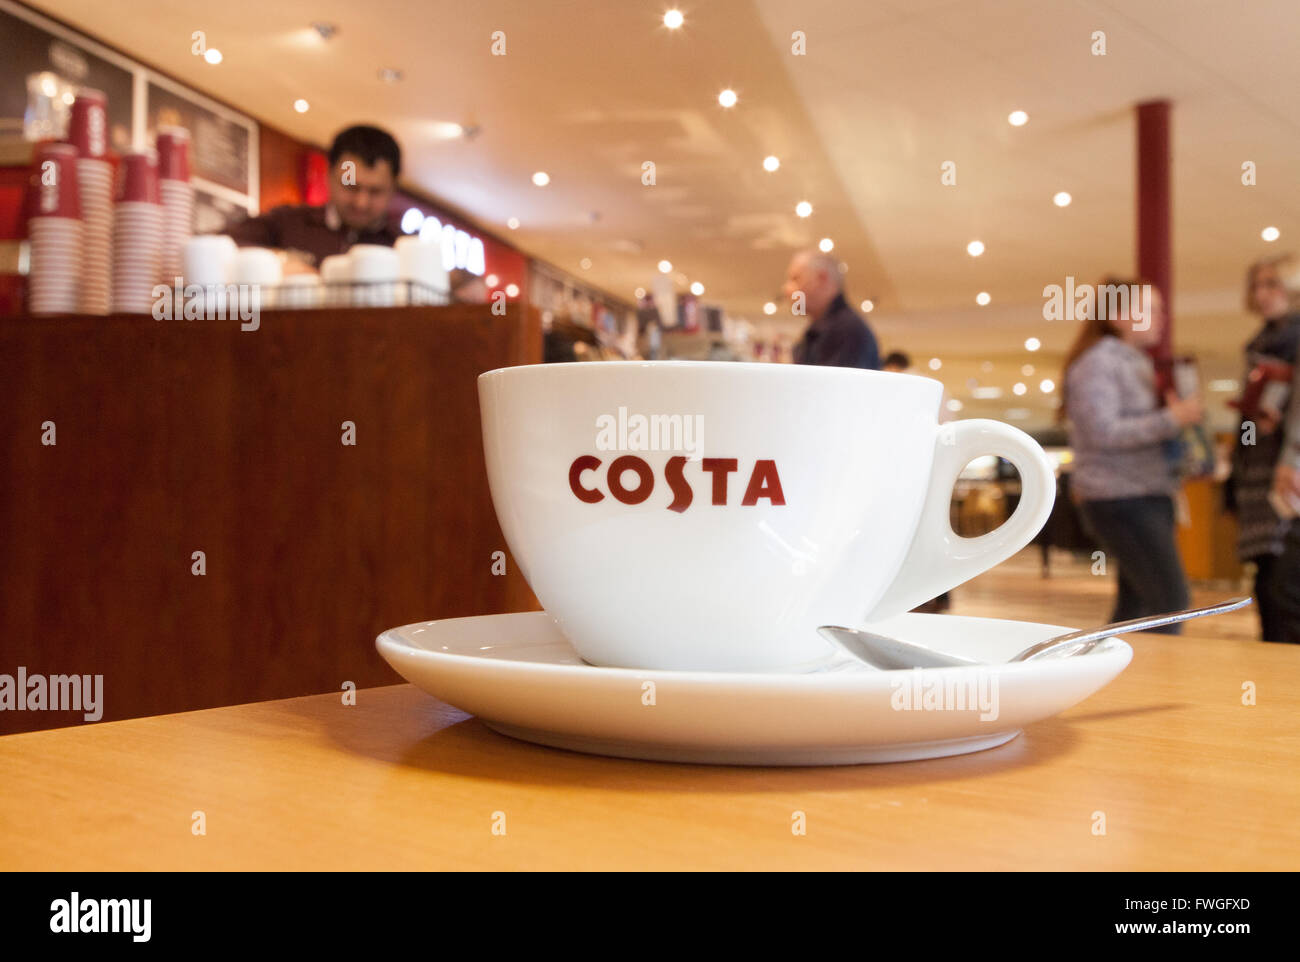 Costa Coffee cup on a table, South Mimms motorway service station, M25 Services, London UK Stock Photo